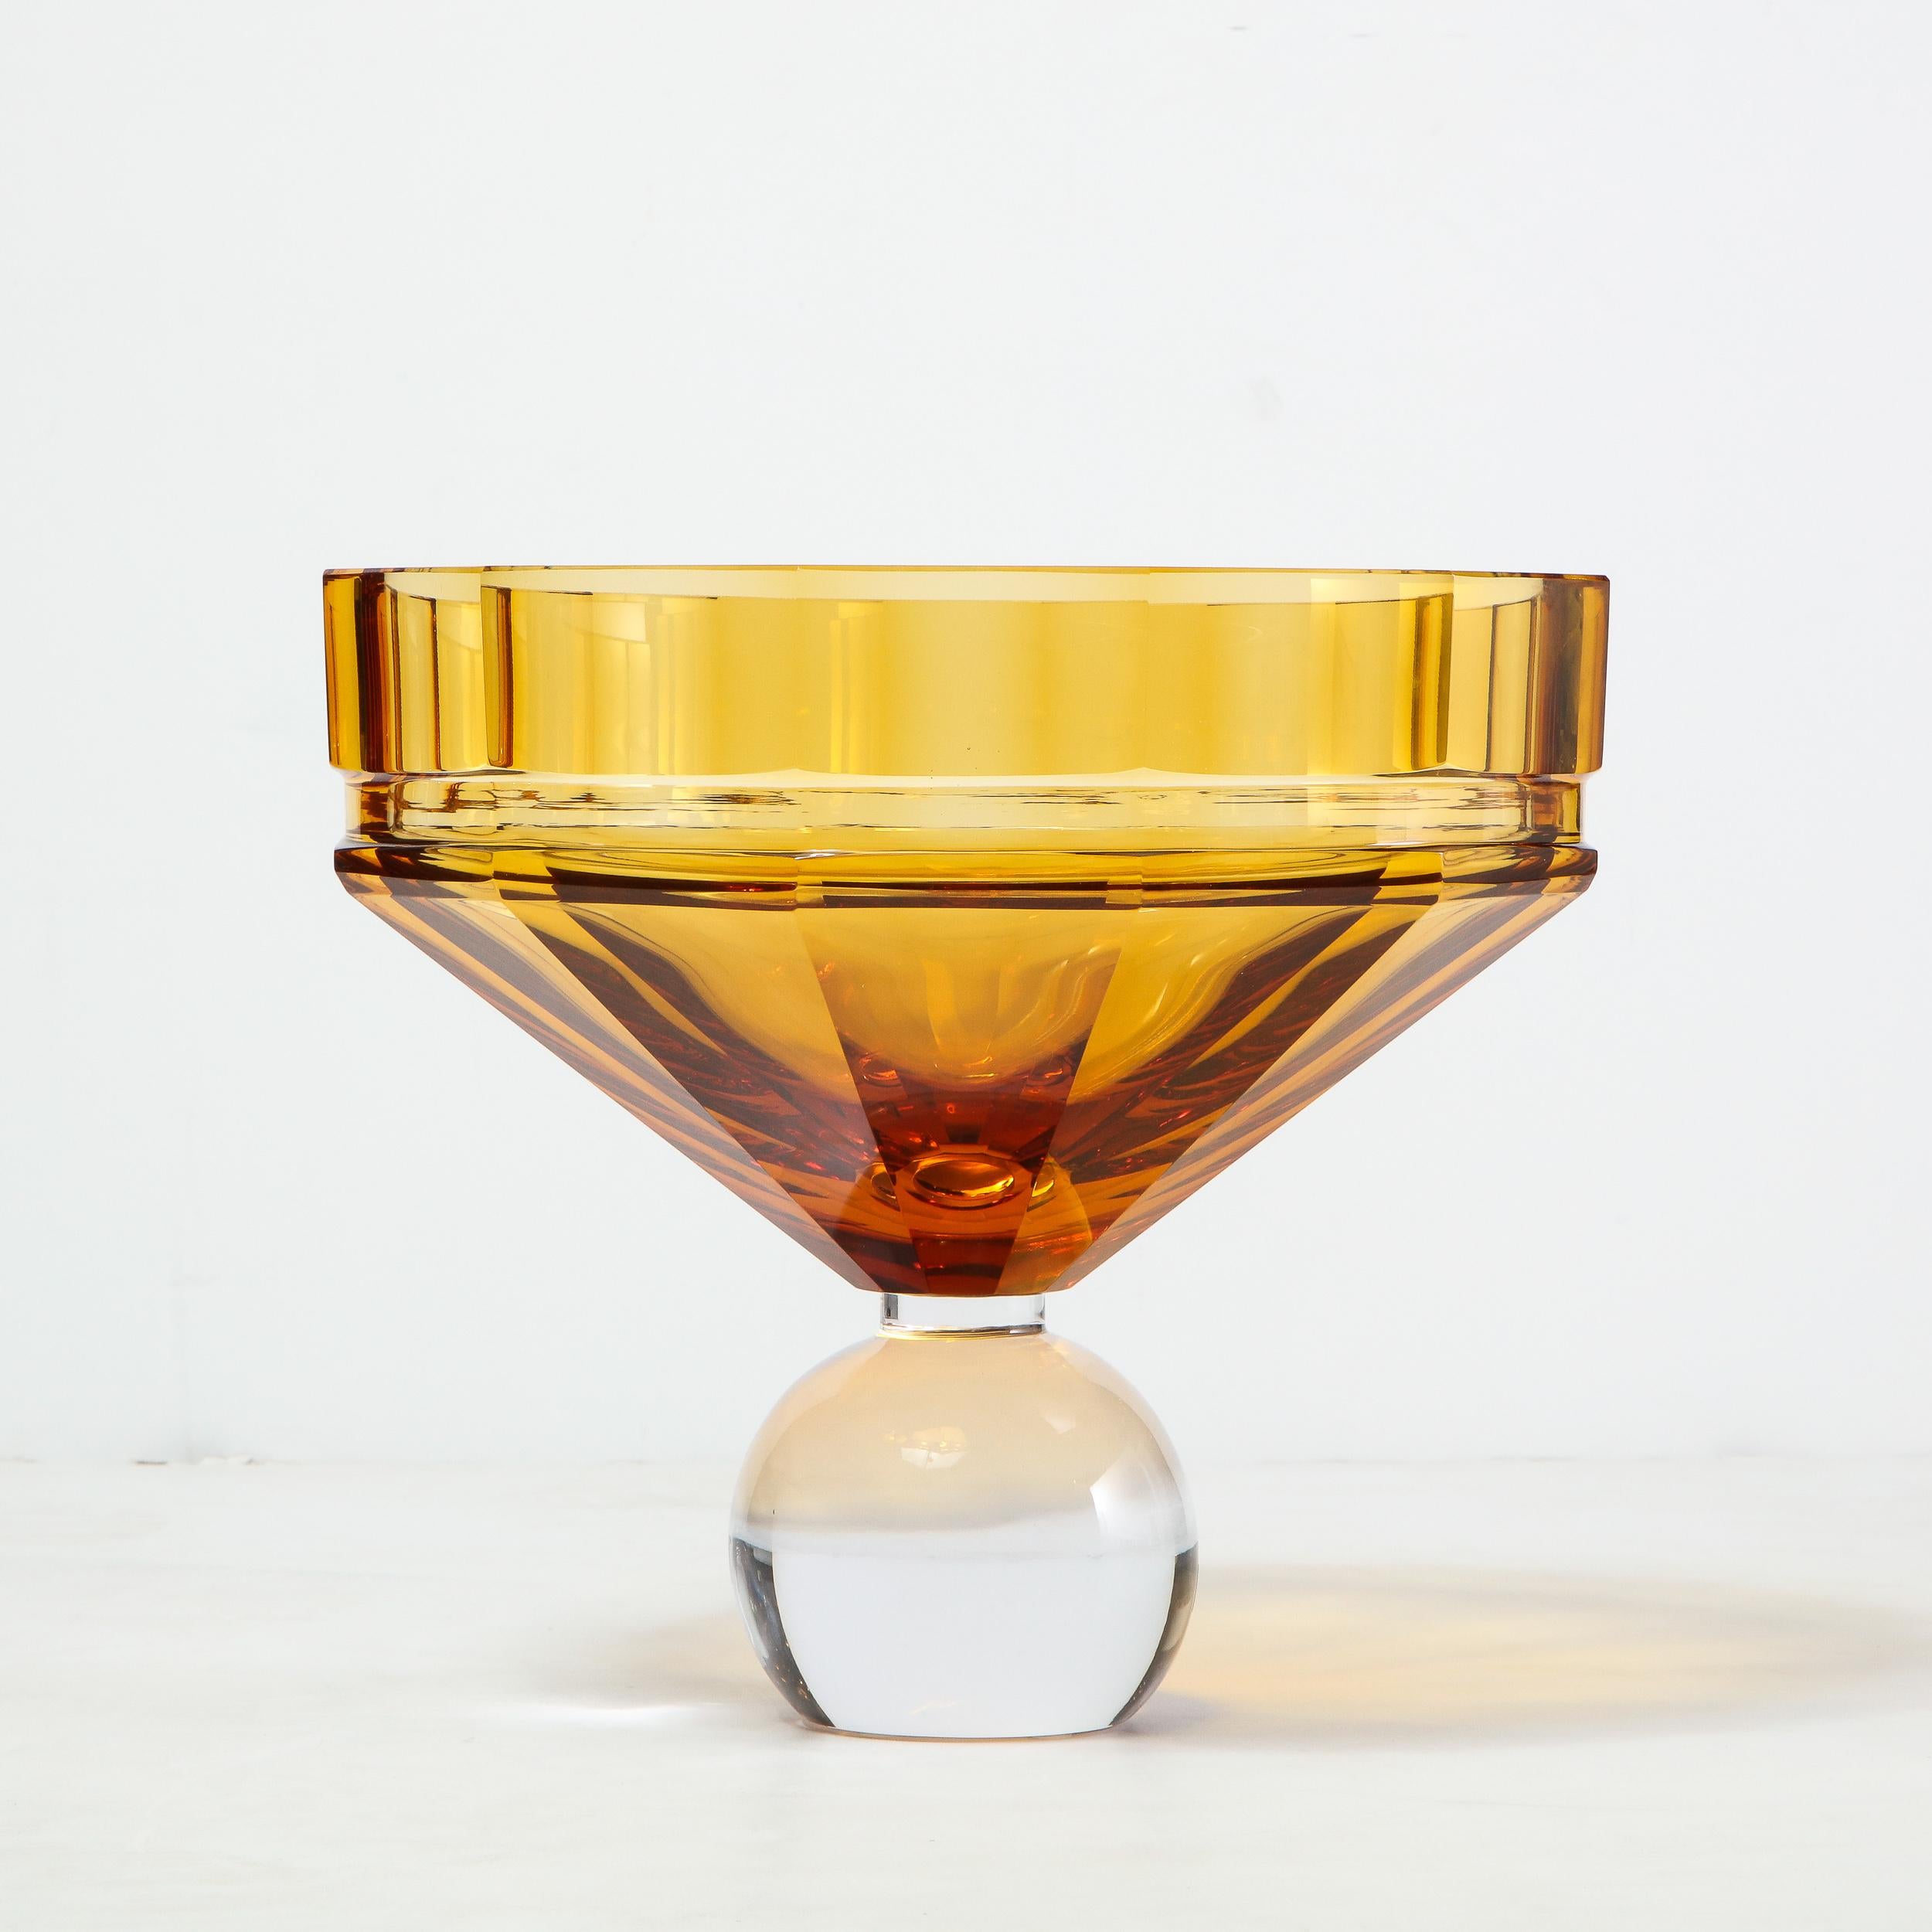 20th Century Modernist Czech Faceted Amber & Translucent Glass Center Bowl Signed by Moser